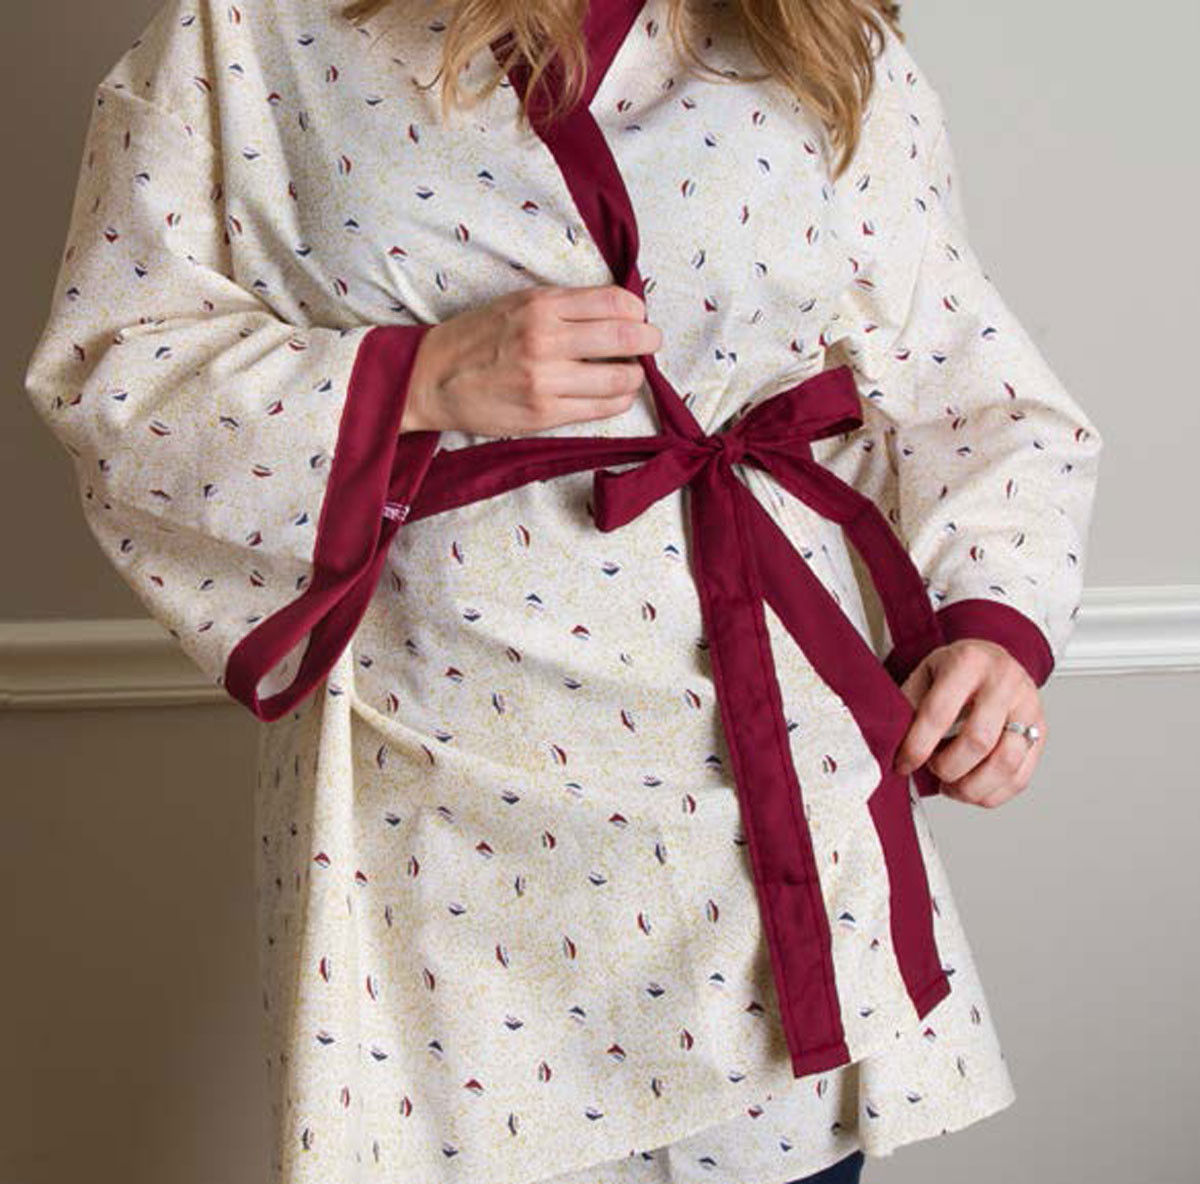 What is the specific function of the specialized design in these mammography gowns?